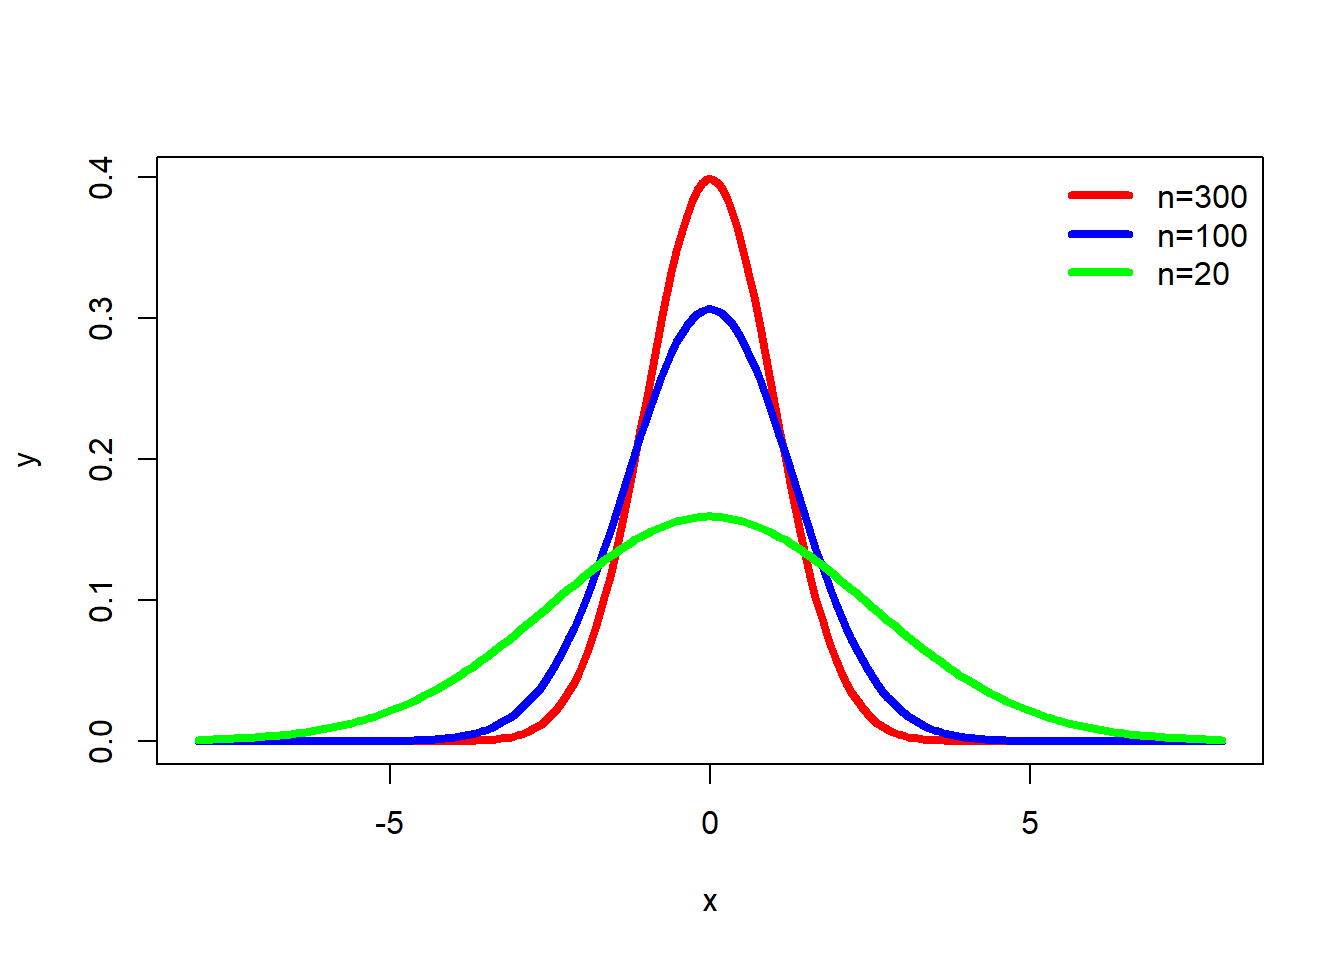 Normal Distribution and $n$-size